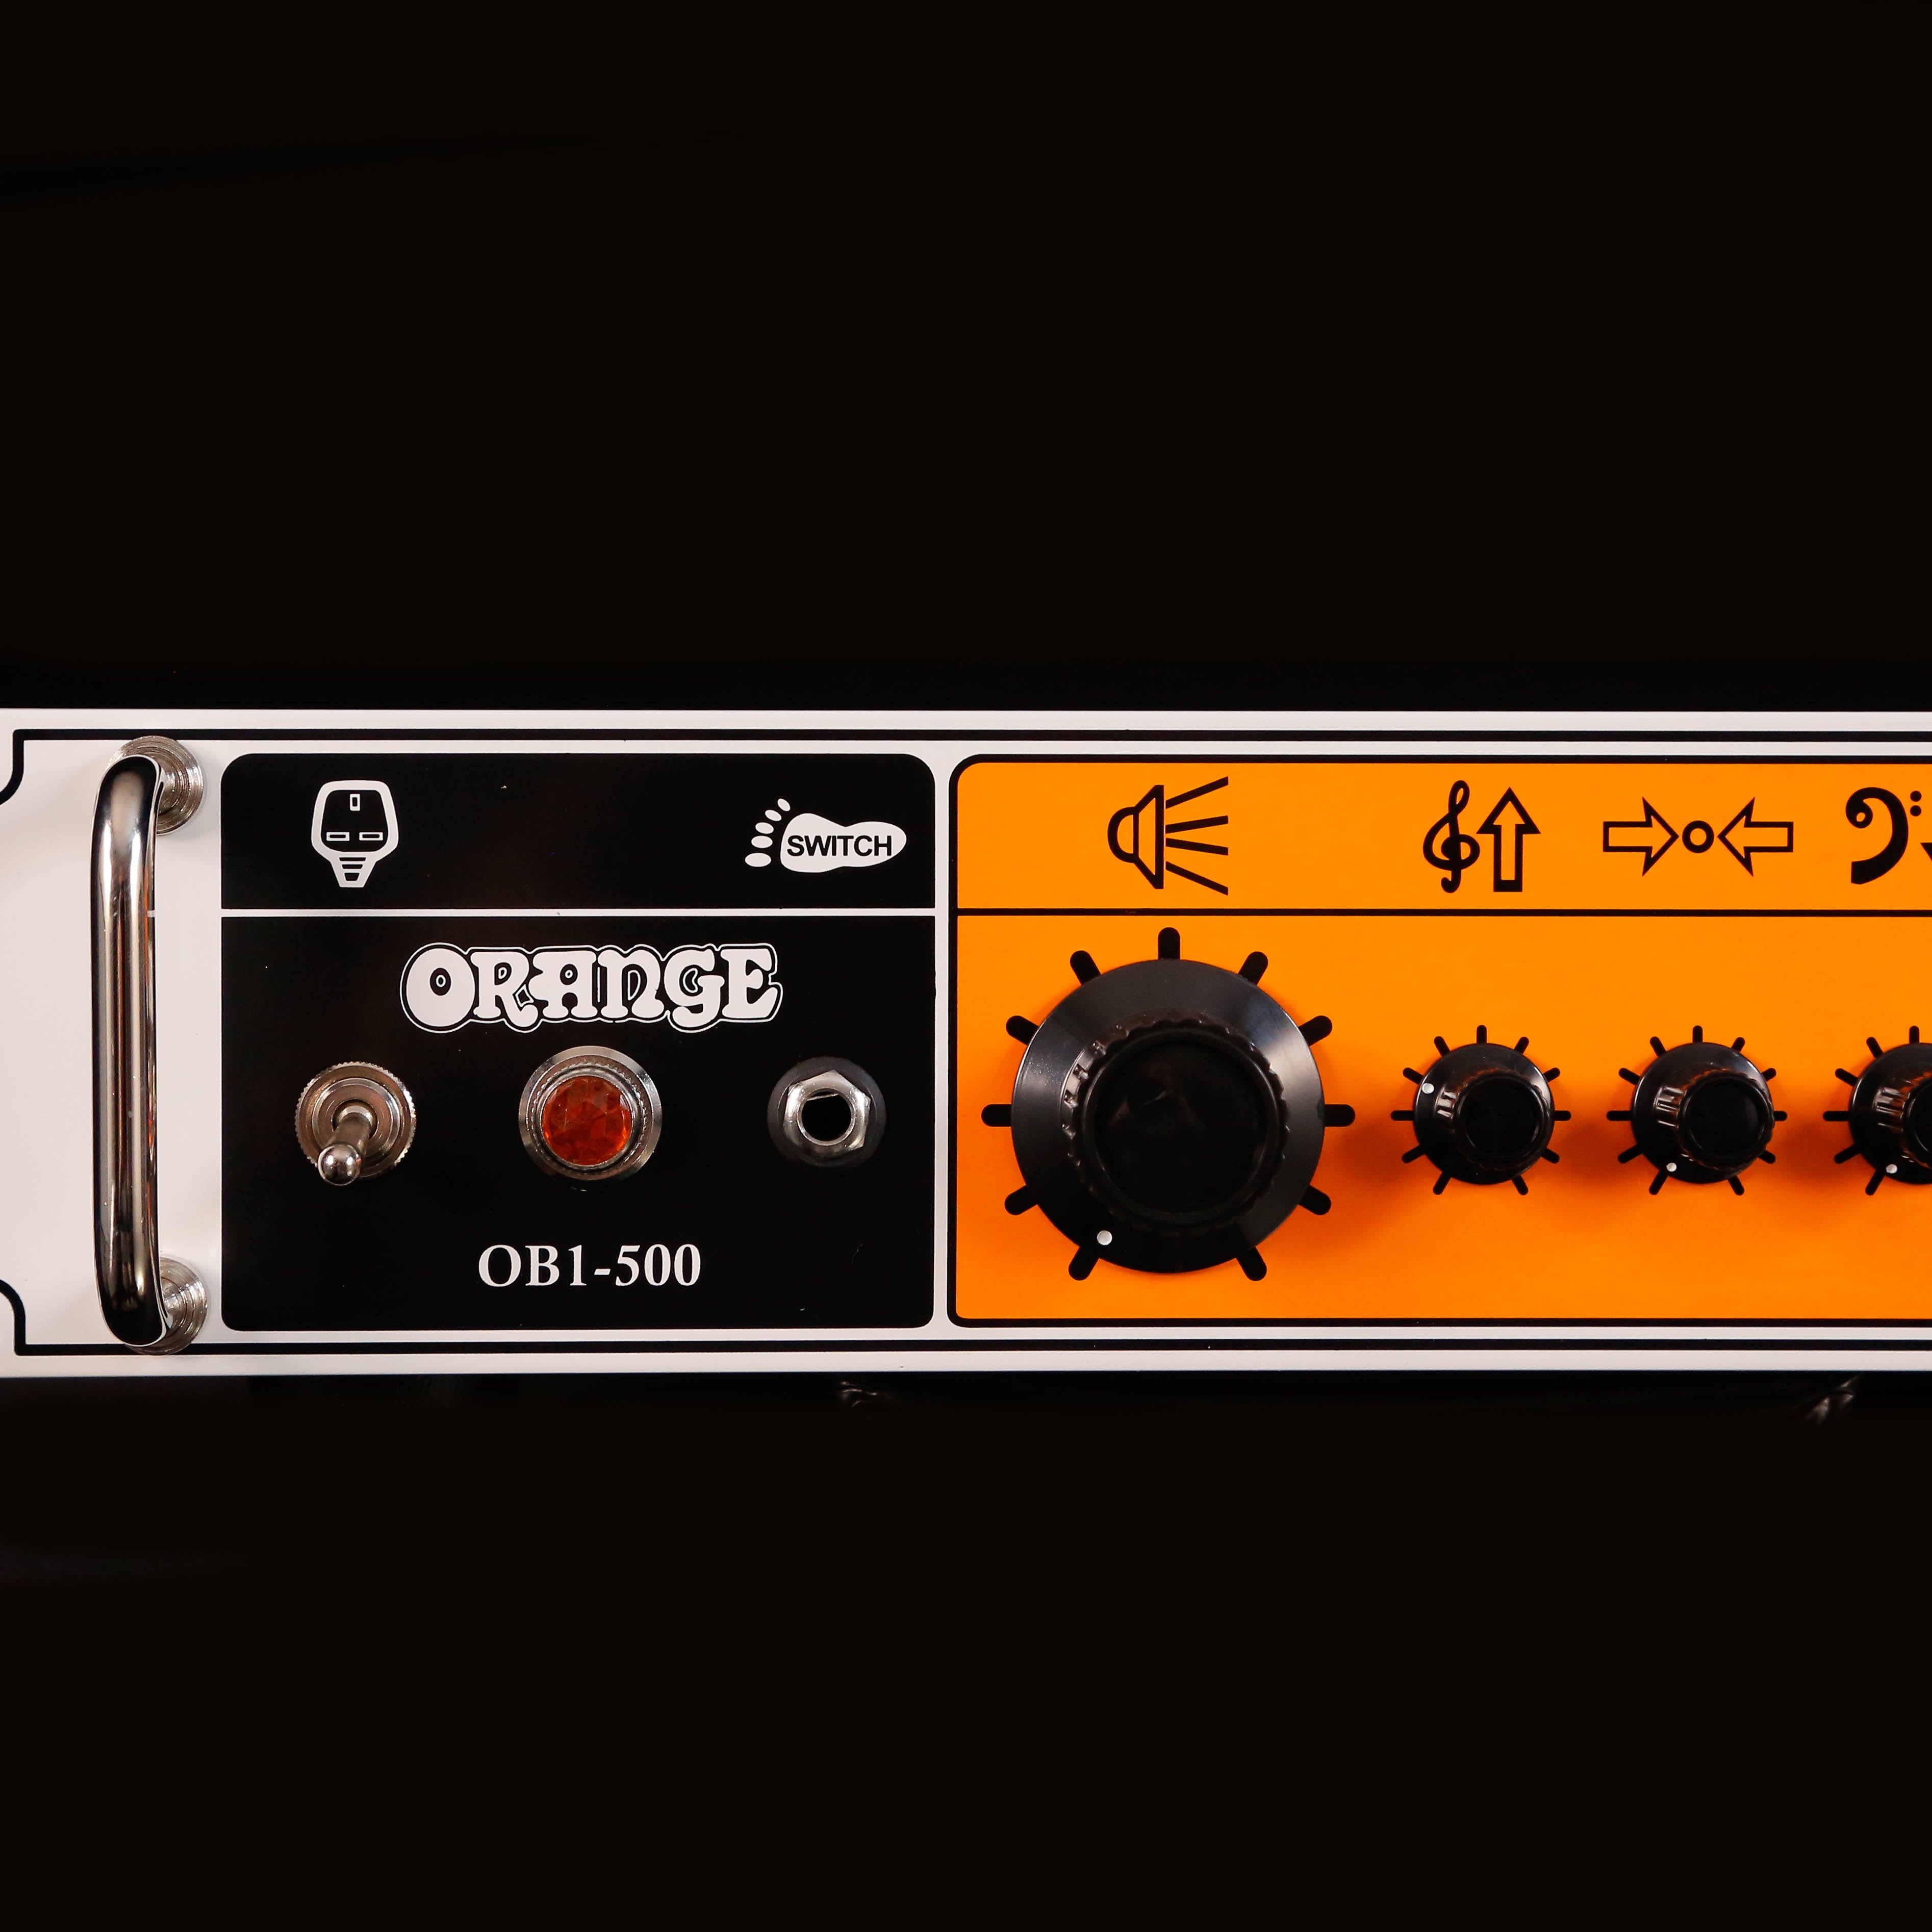 Orange OB1-300 300 W class AB output, blendable gain chain, solid state